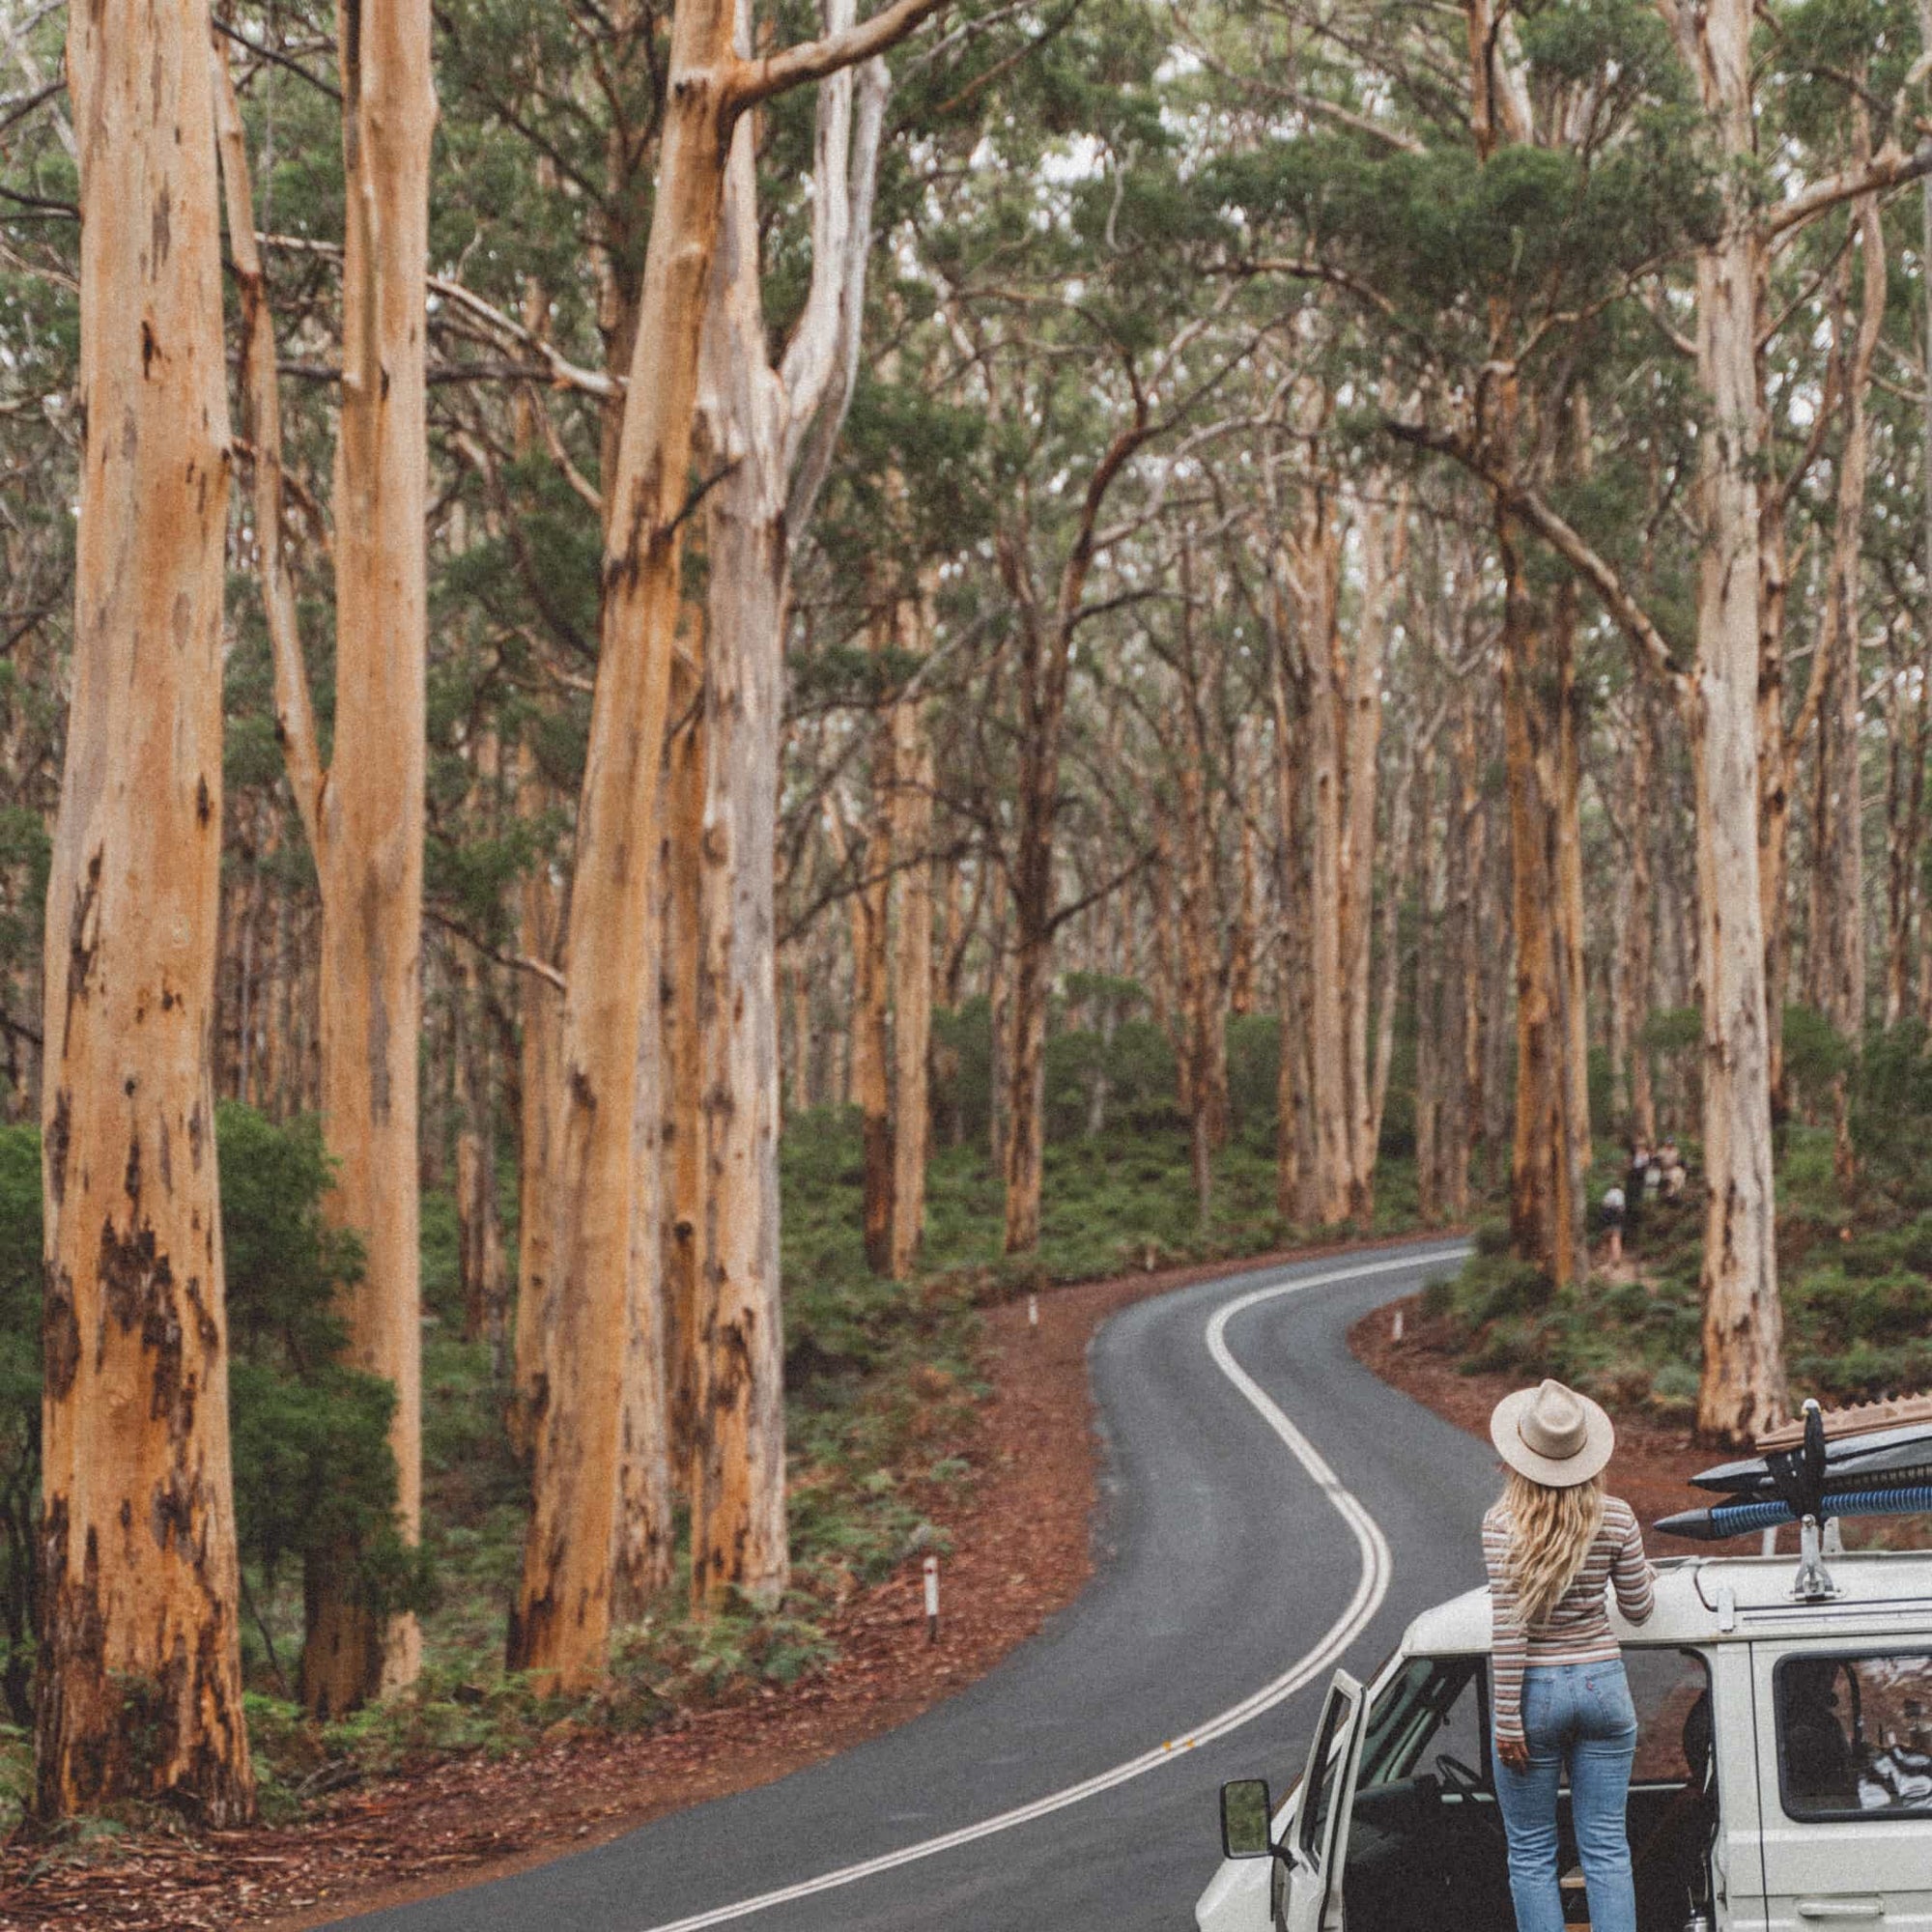 Kendall stands on the side of her parked VW van looking ahead at the road curving between gum trees